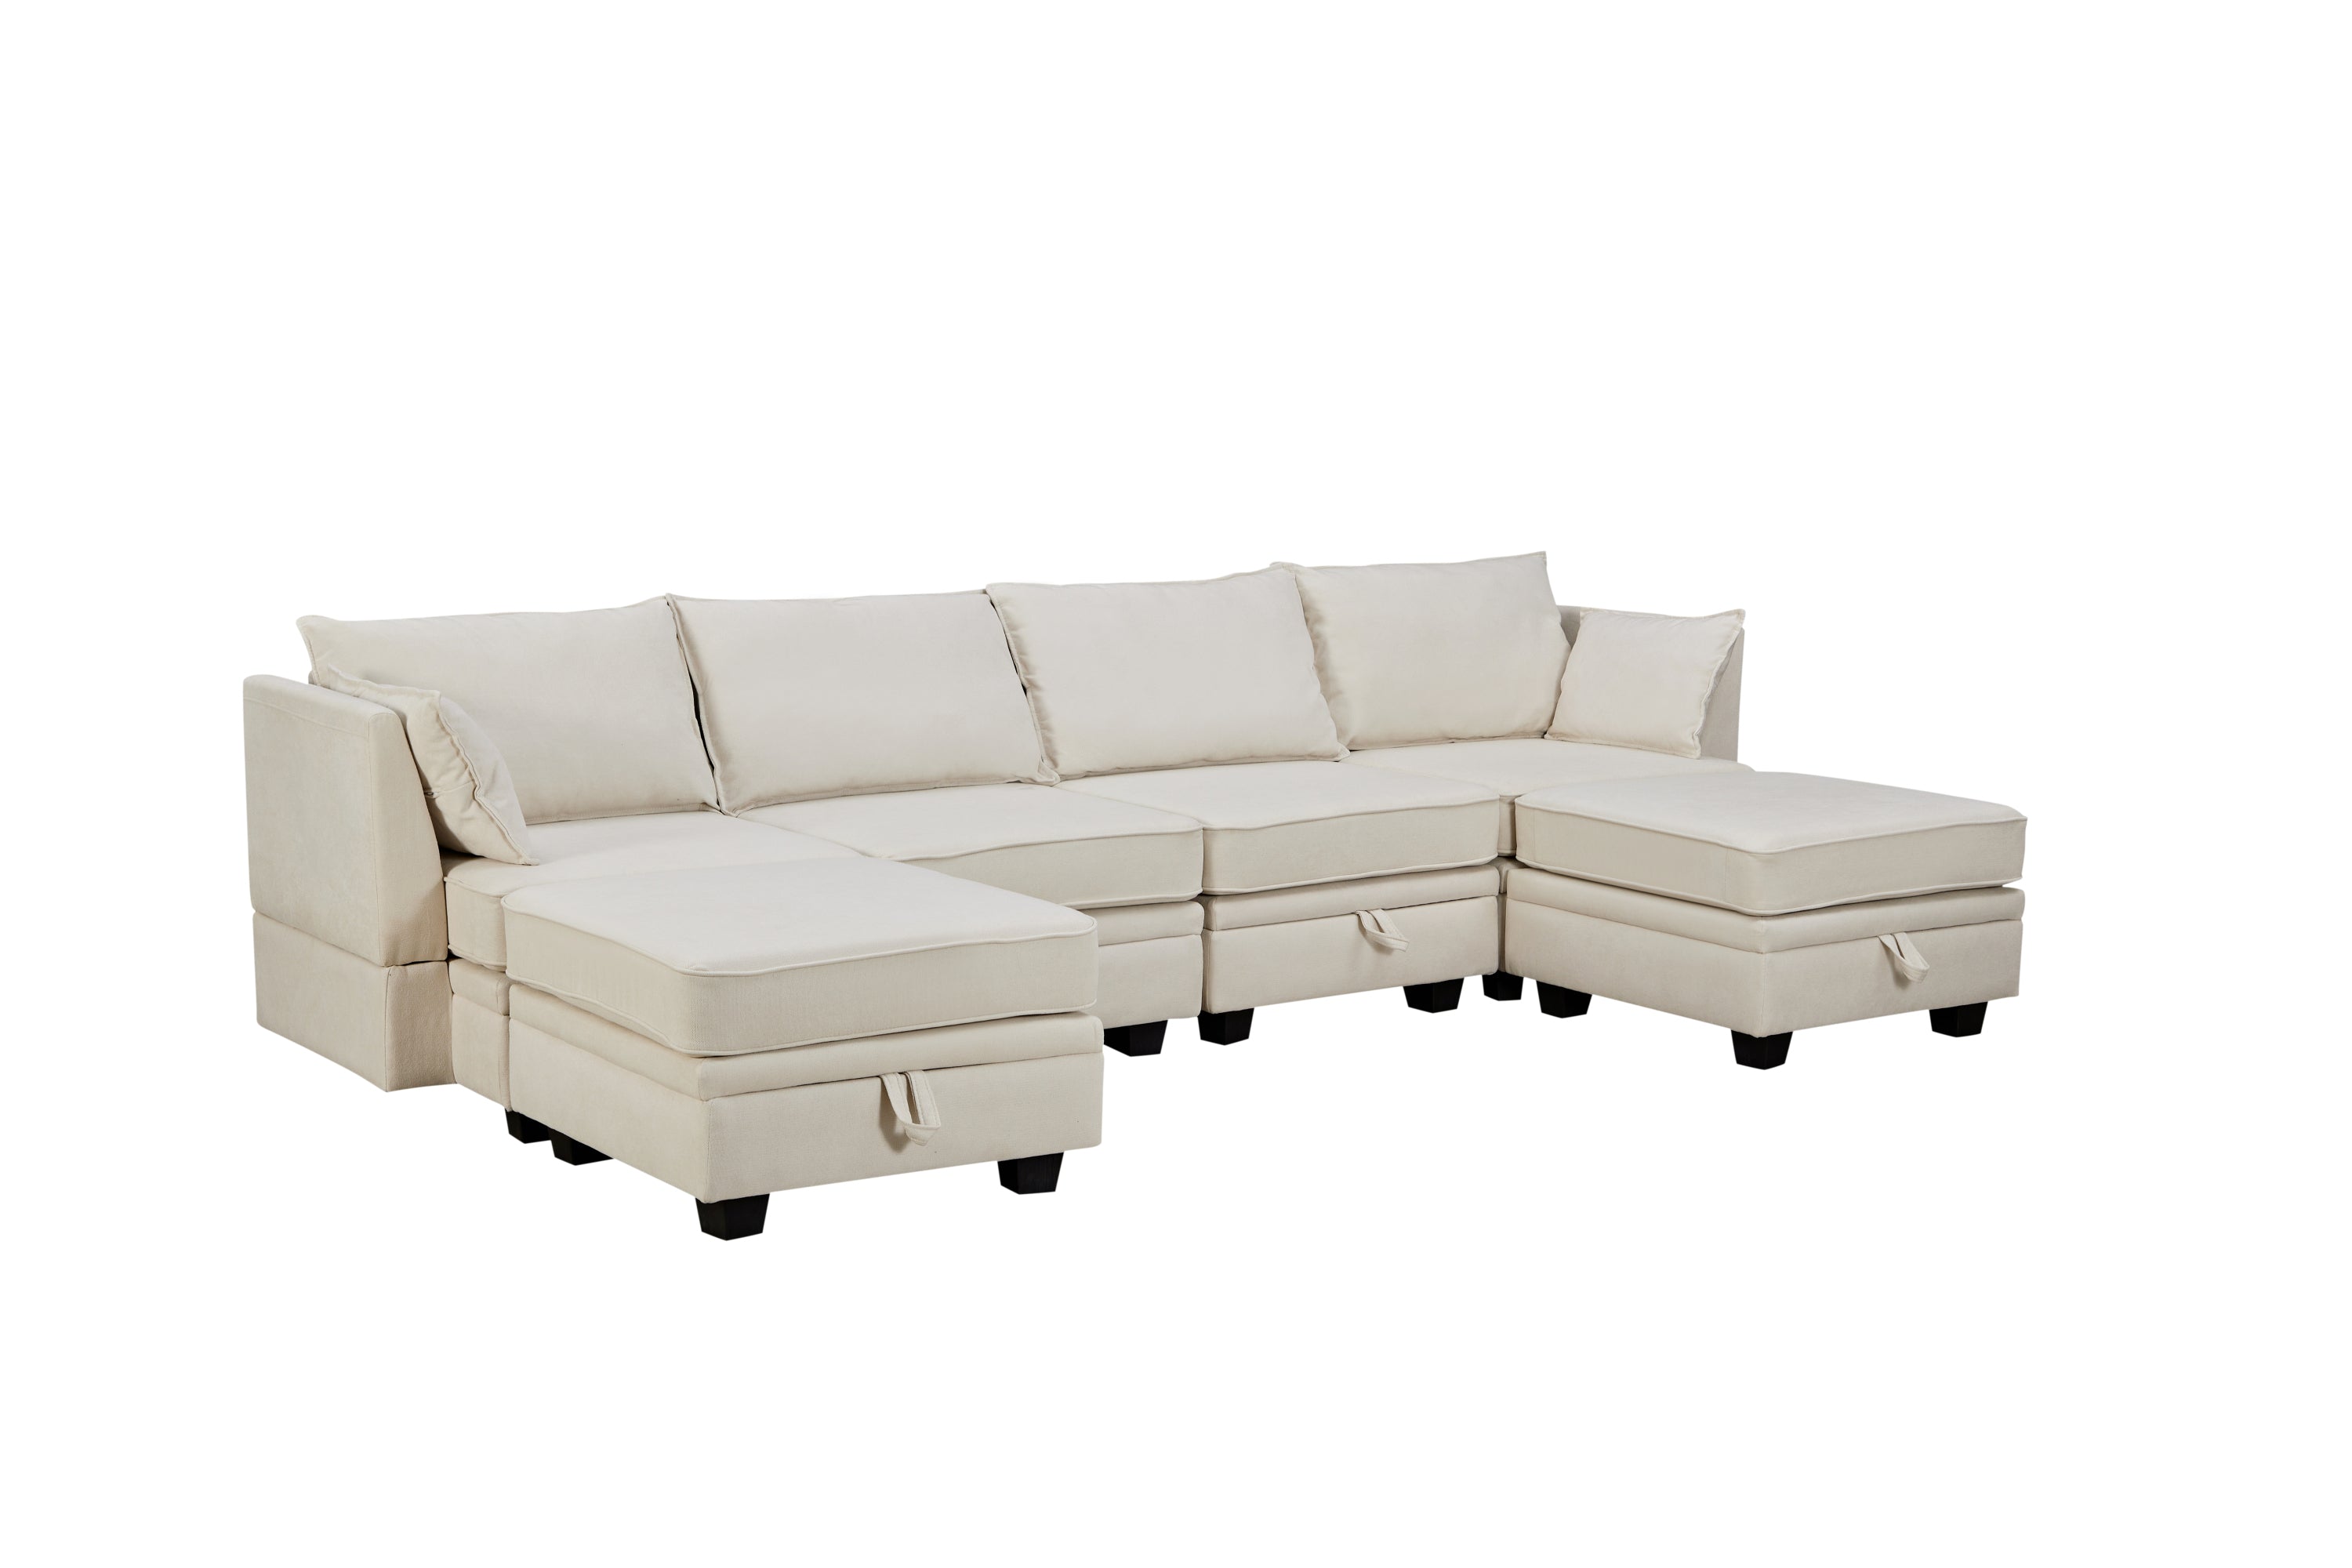 Large U-Shape Sectional Sofa: Convertible Bed, Reversible Chaise, Storage Beige-Stationary Sectionals-American Furniture Outlet